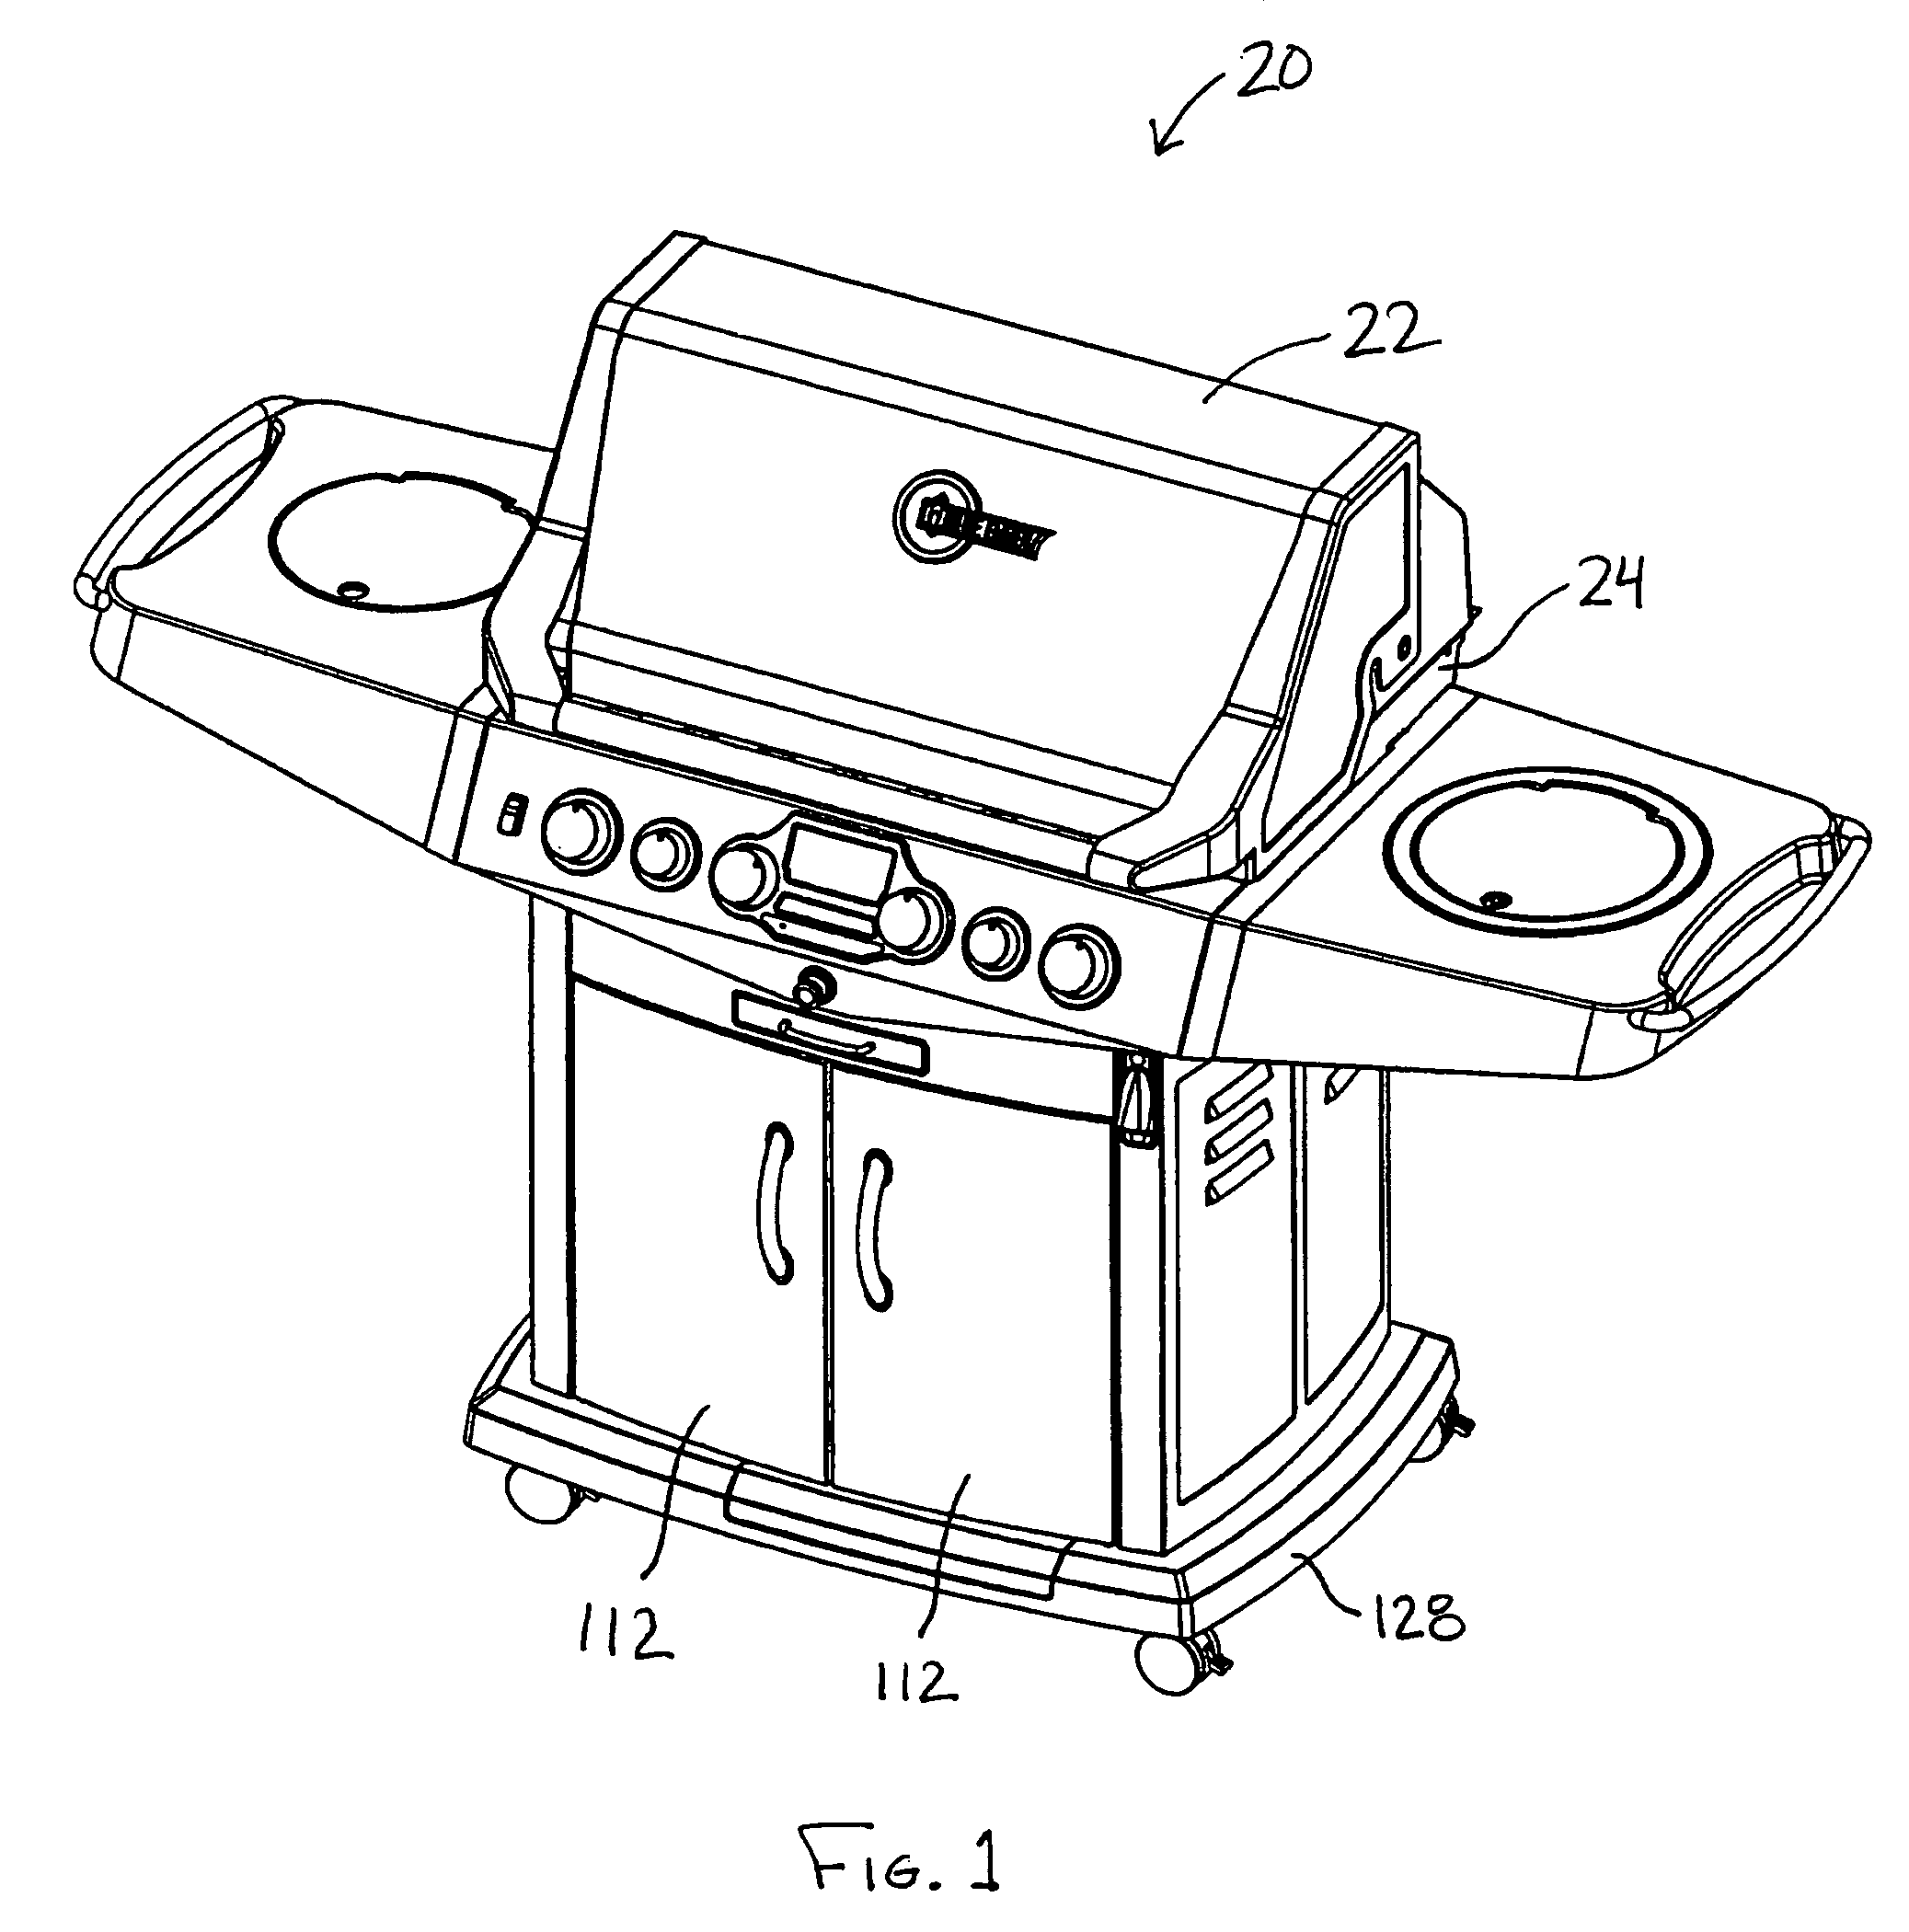 Temperature control apparatus and method for a barbeque grill